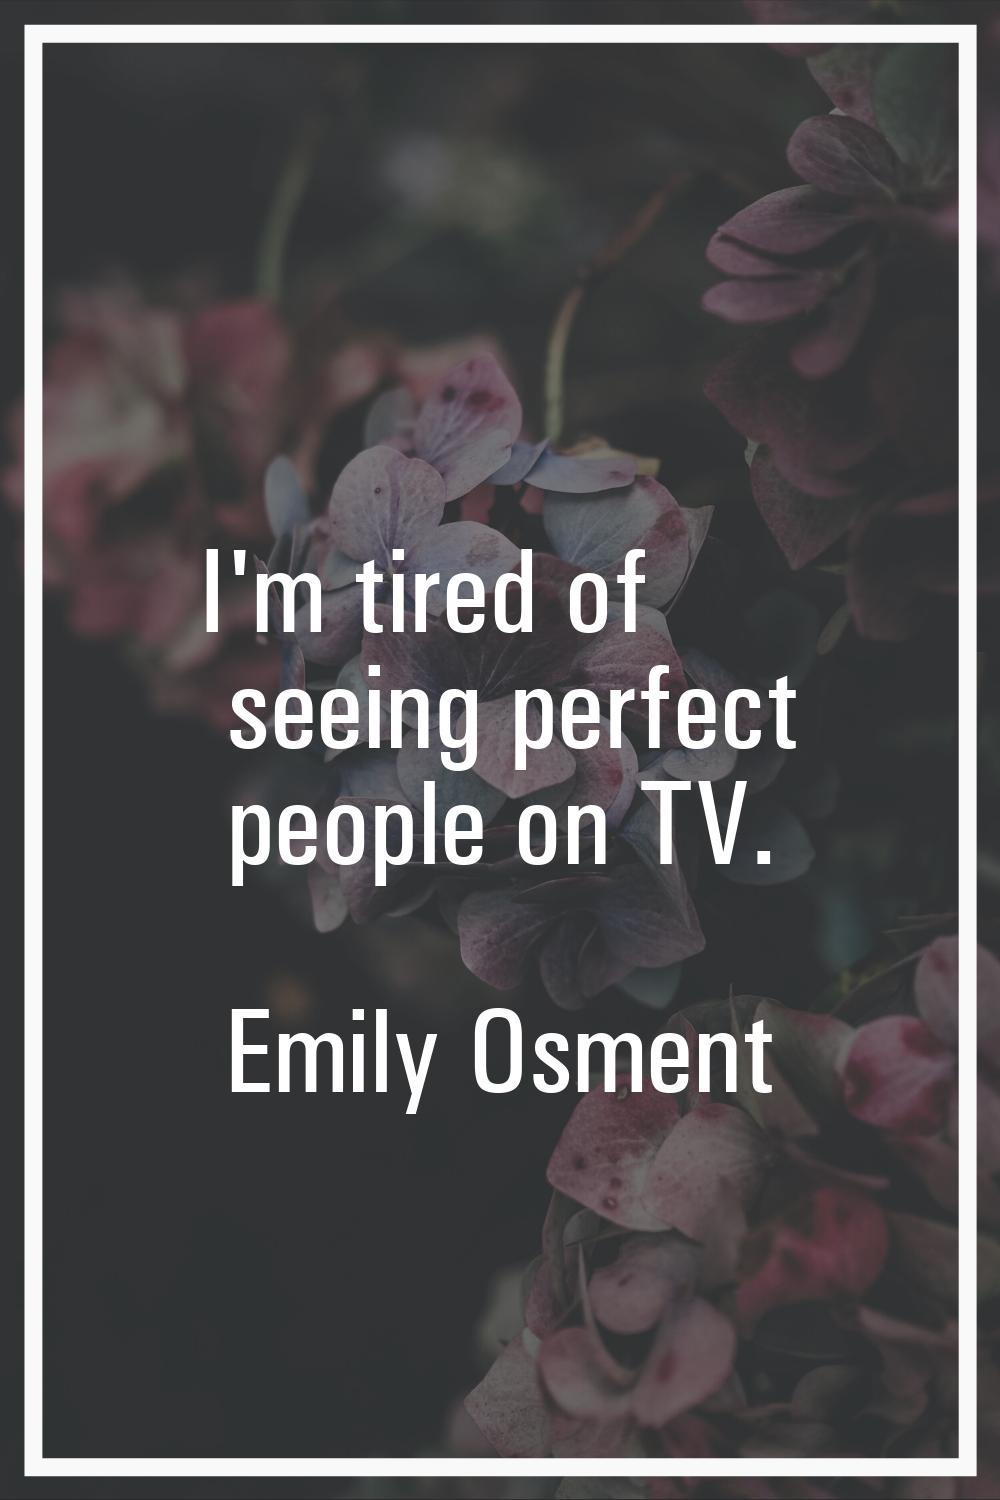 I'm tired of seeing perfect people on TV.